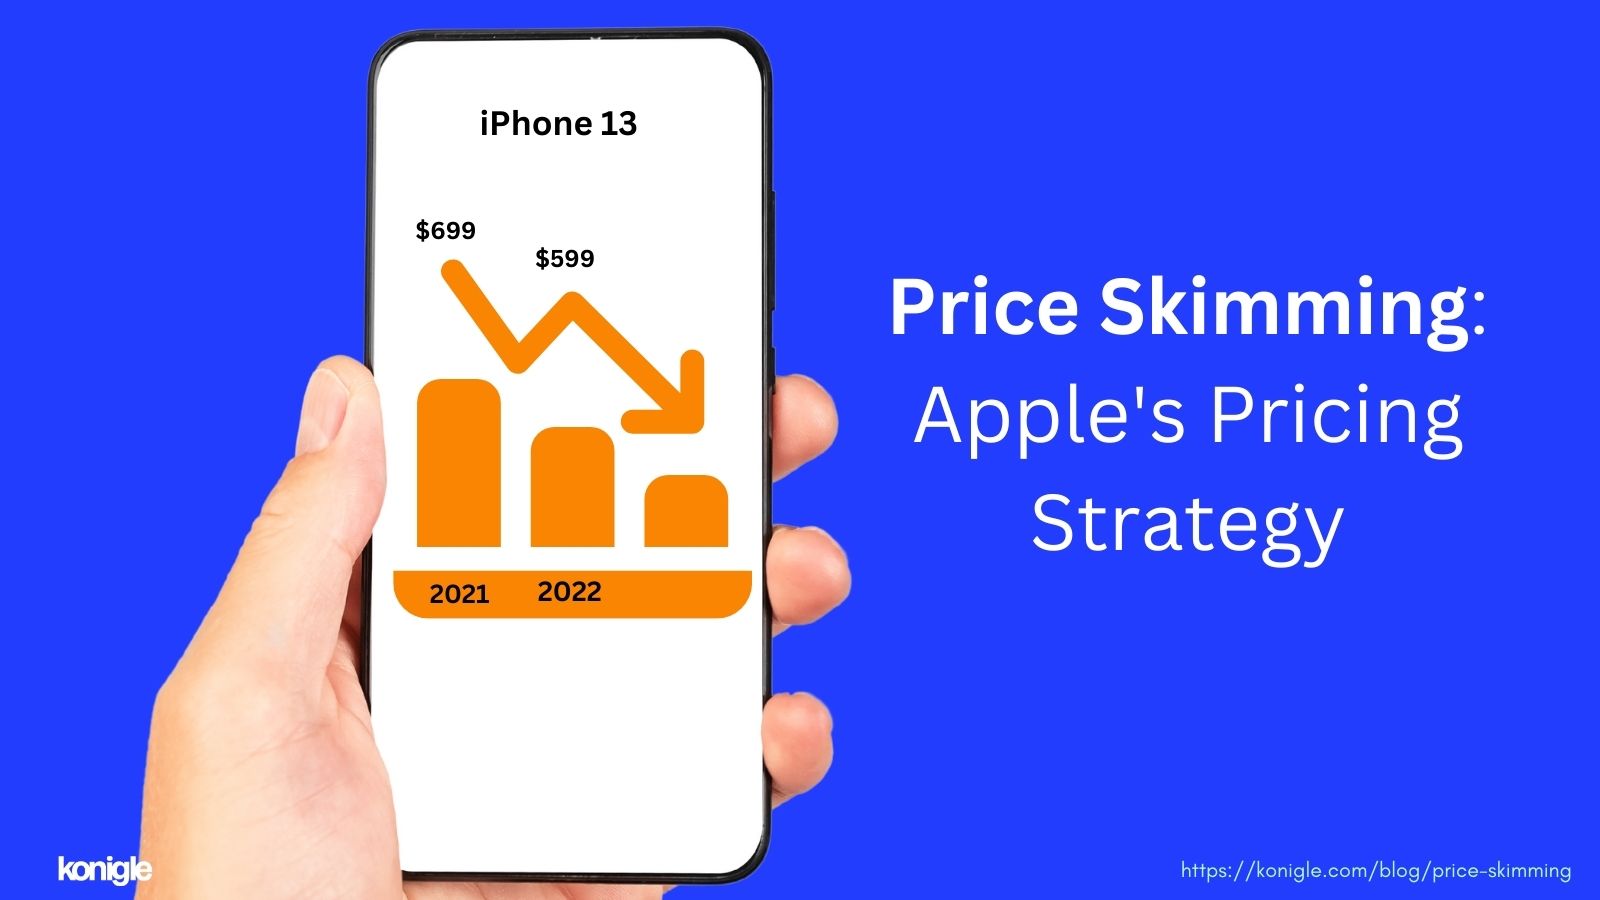 Illustrating price skimming using Apple's pricing strategy.